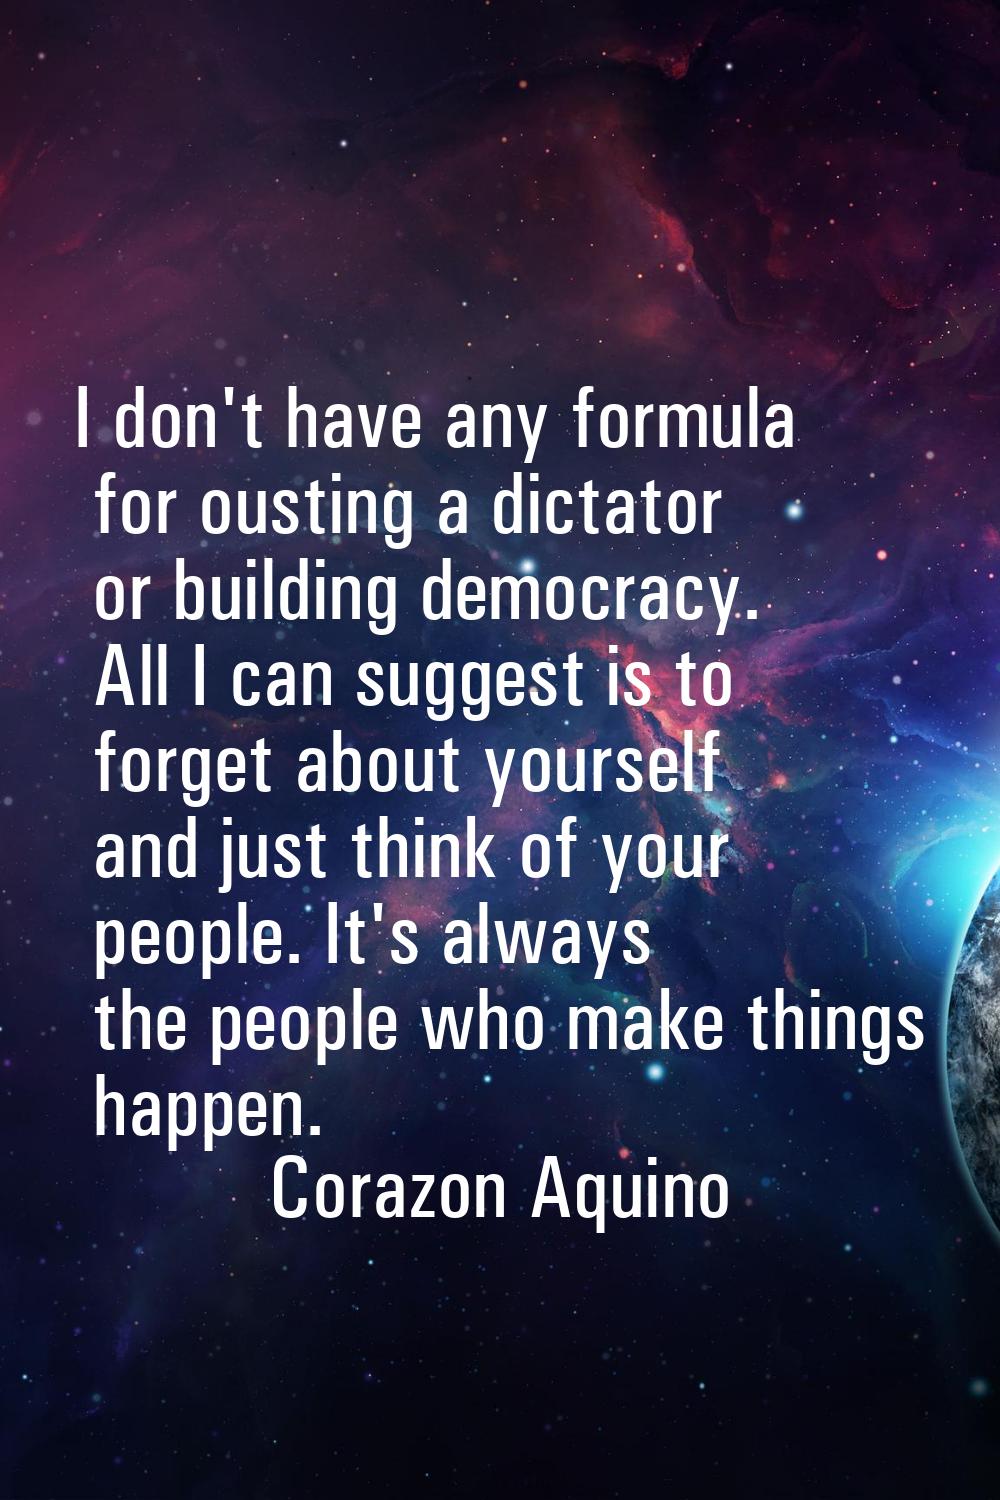 I don't have any formula for ousting a dictator or building democracy. All I can suggest is to forg